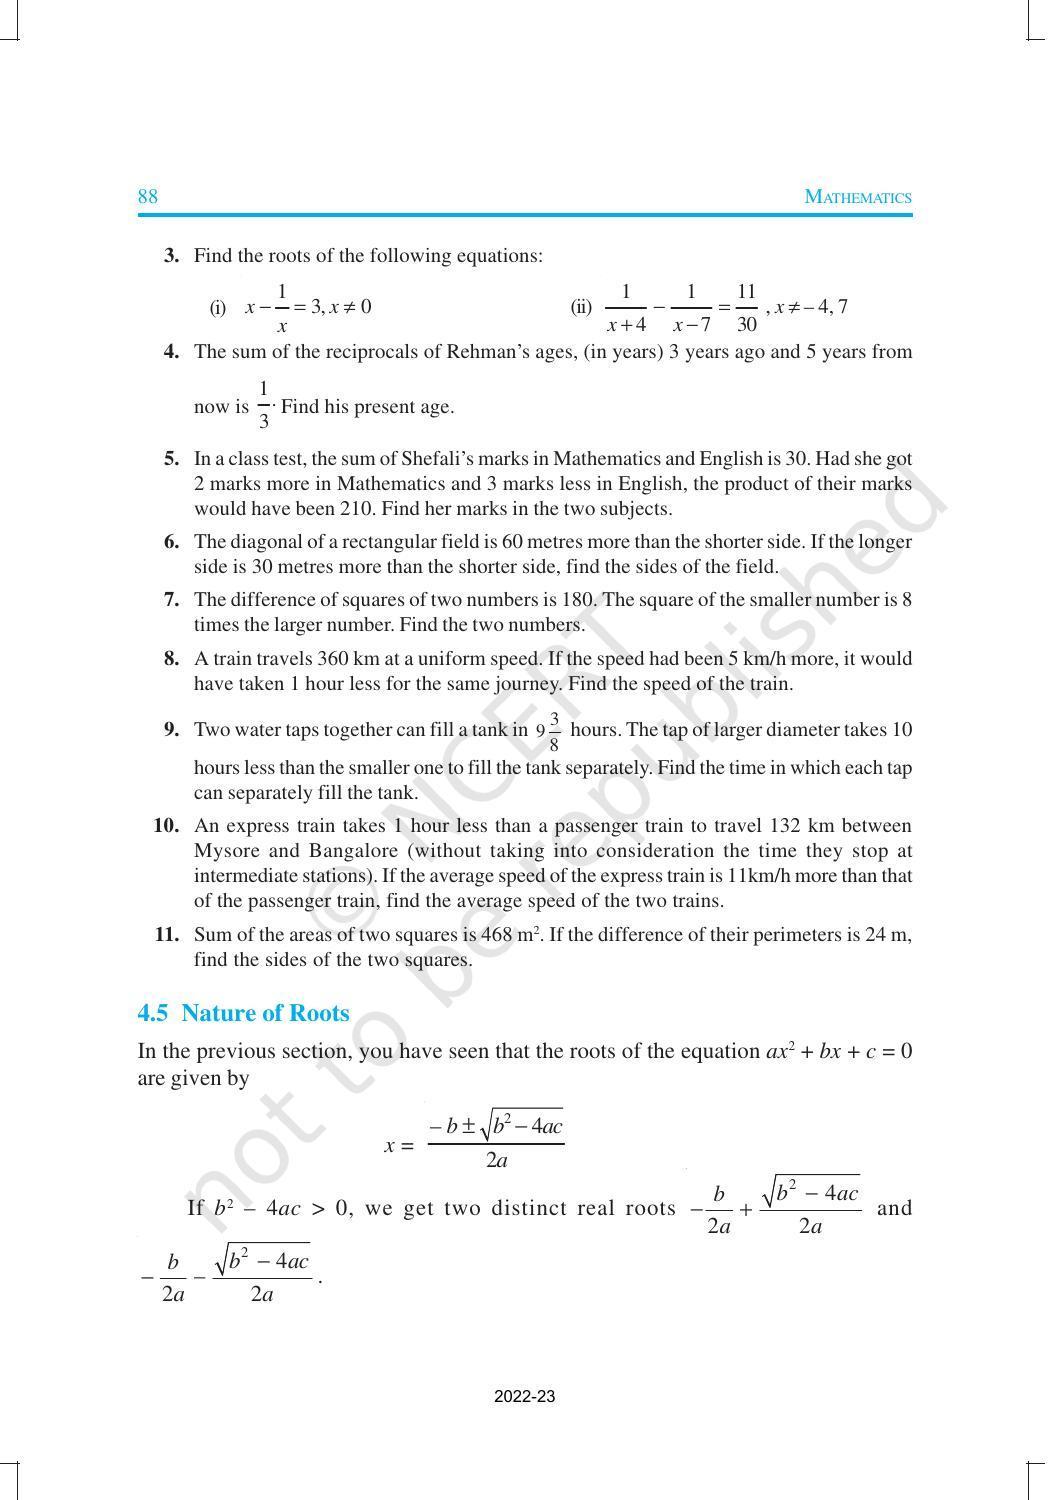 NCERT Book for Class 10 Maths Chapter 4 Quadratic Equations - Page 19